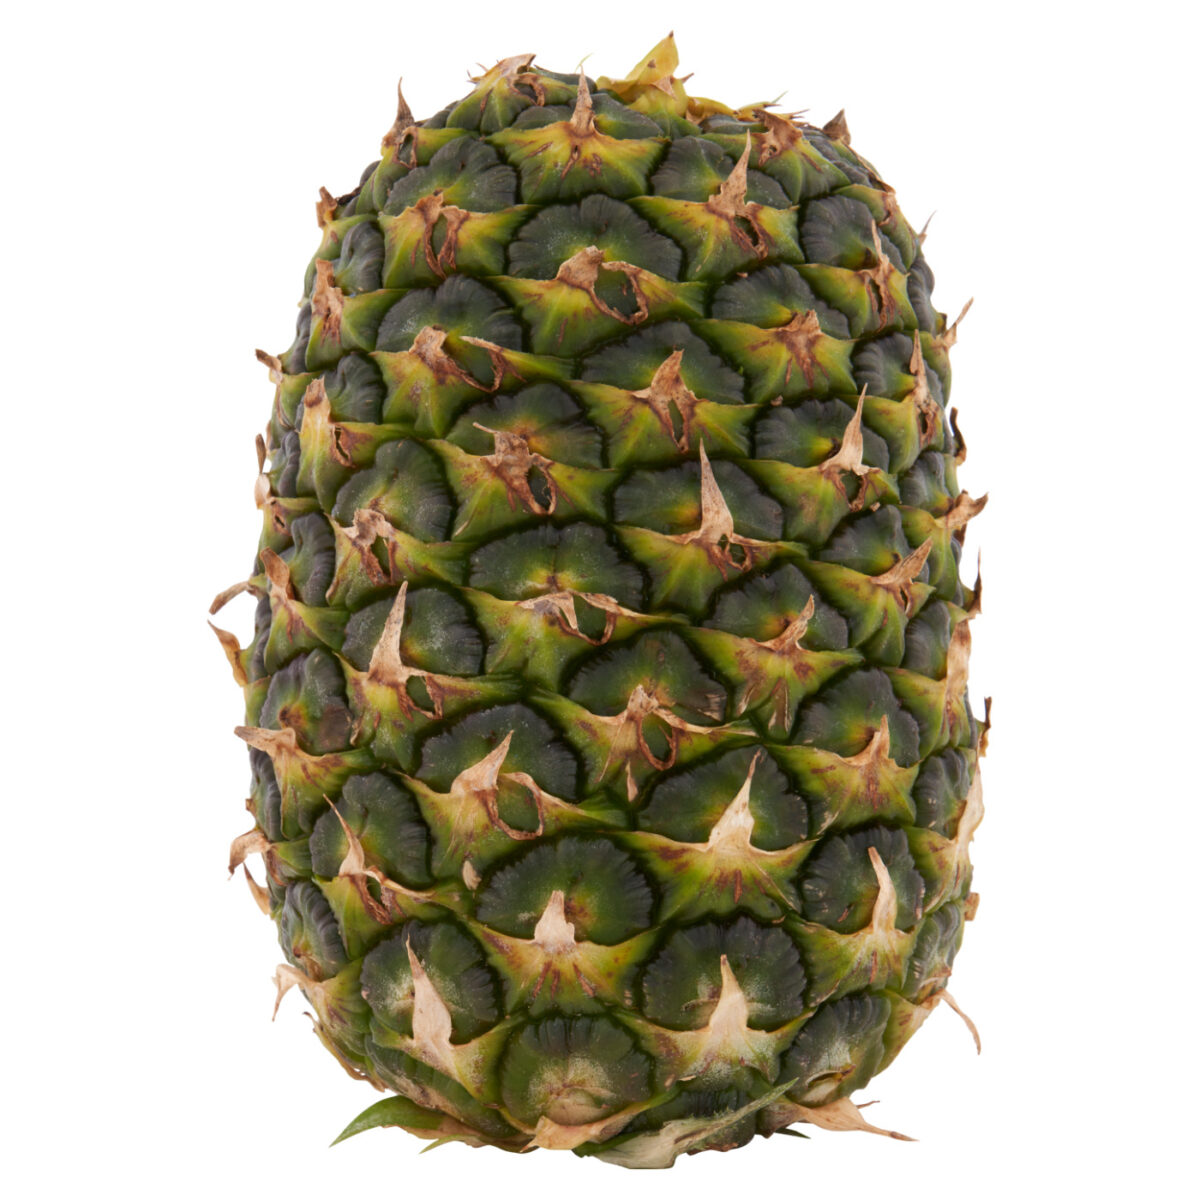 Aldi pineapple: The UK’s fourth largest supermarket will be removing the green leaves from its pineapples during the production process for recycling.